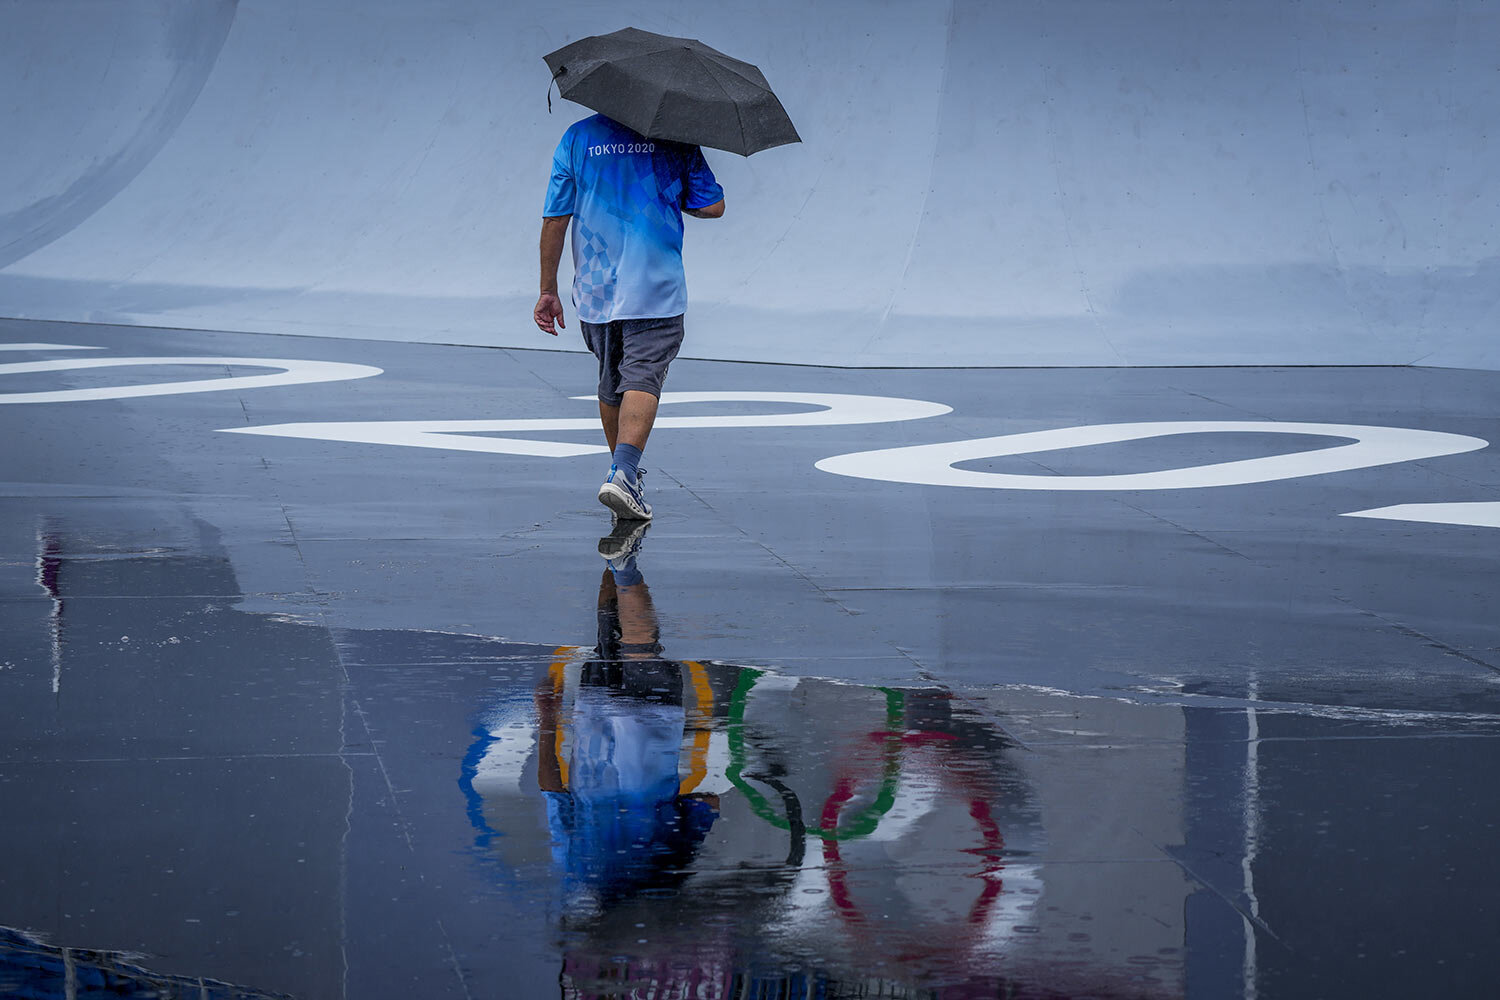  A venue official takes a look at the BMX Freestyle course after a training session was cancelled due to rain, at the 2020 Summer Olympics, Tuesday, July 27, 2021, in Tokyo, Japan. (AP Photo/Ben Curtis) 